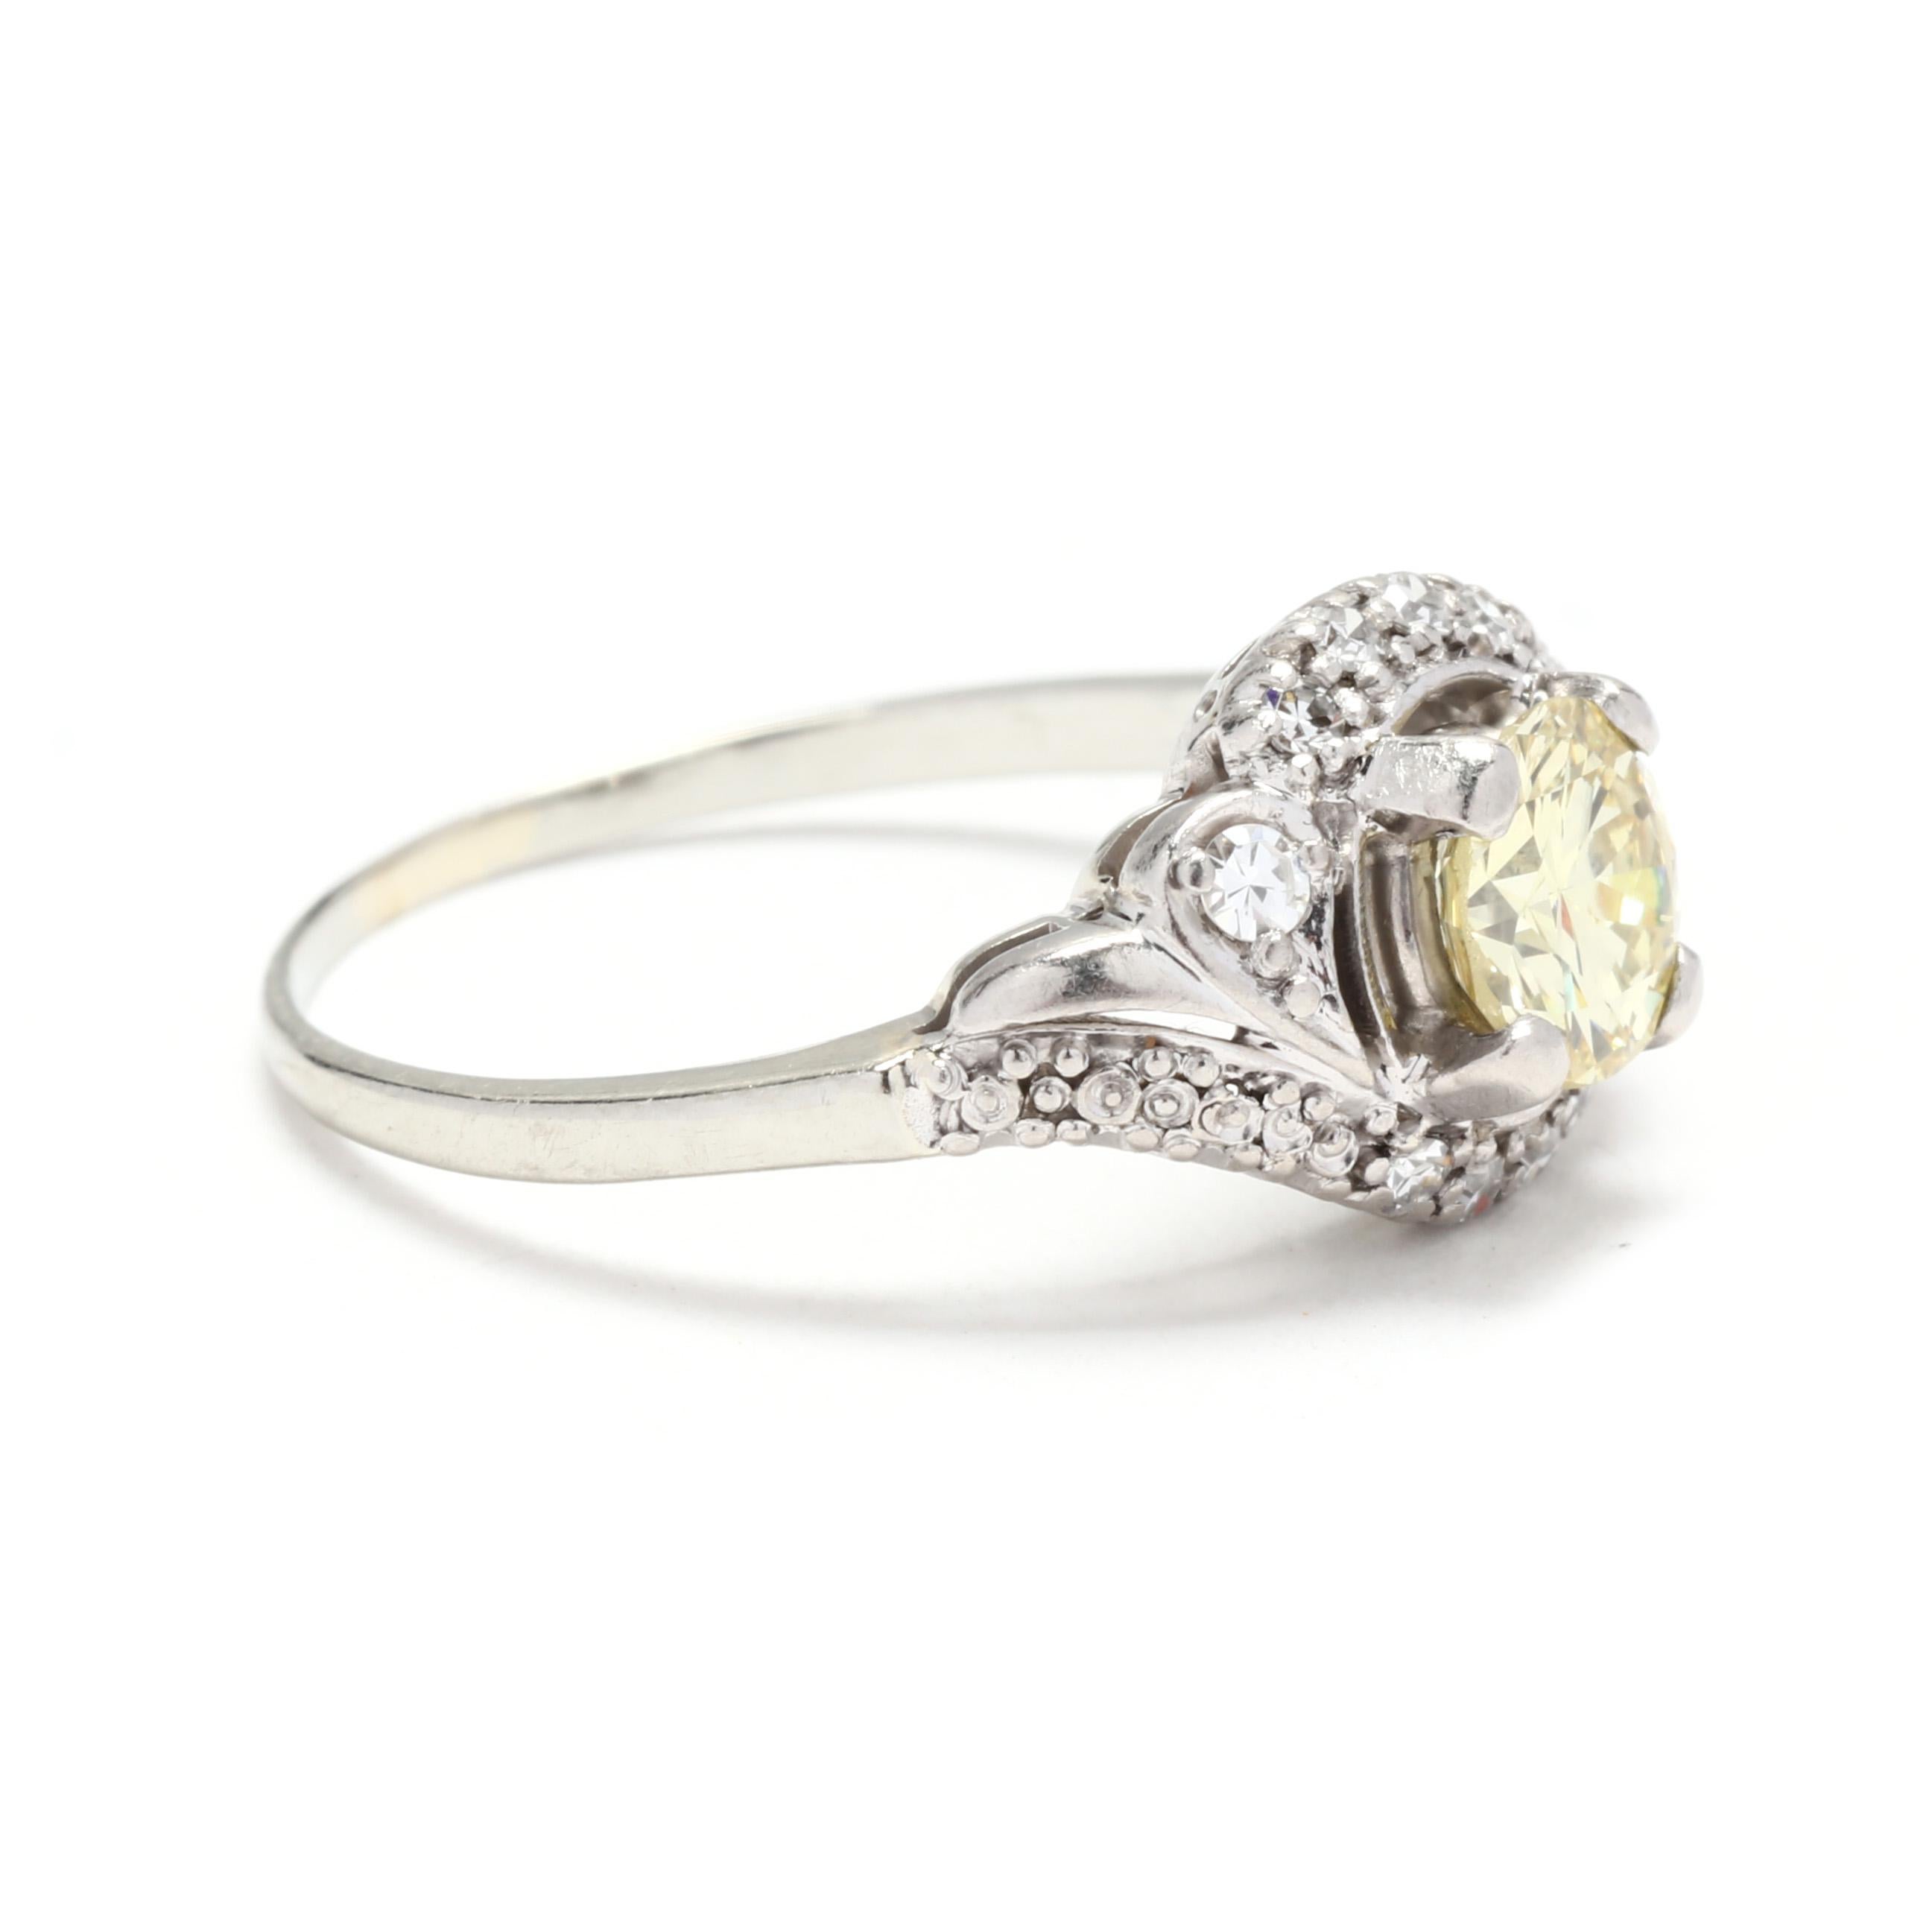 A vintage 18 karat white gold fancy yellow diamond swirl engagement ring. This retro ring features a prong set, round brilliant cut fancy yellow diamond weighing approximately .75 carat, set in a swirl motif mounting with single cut round diamonds